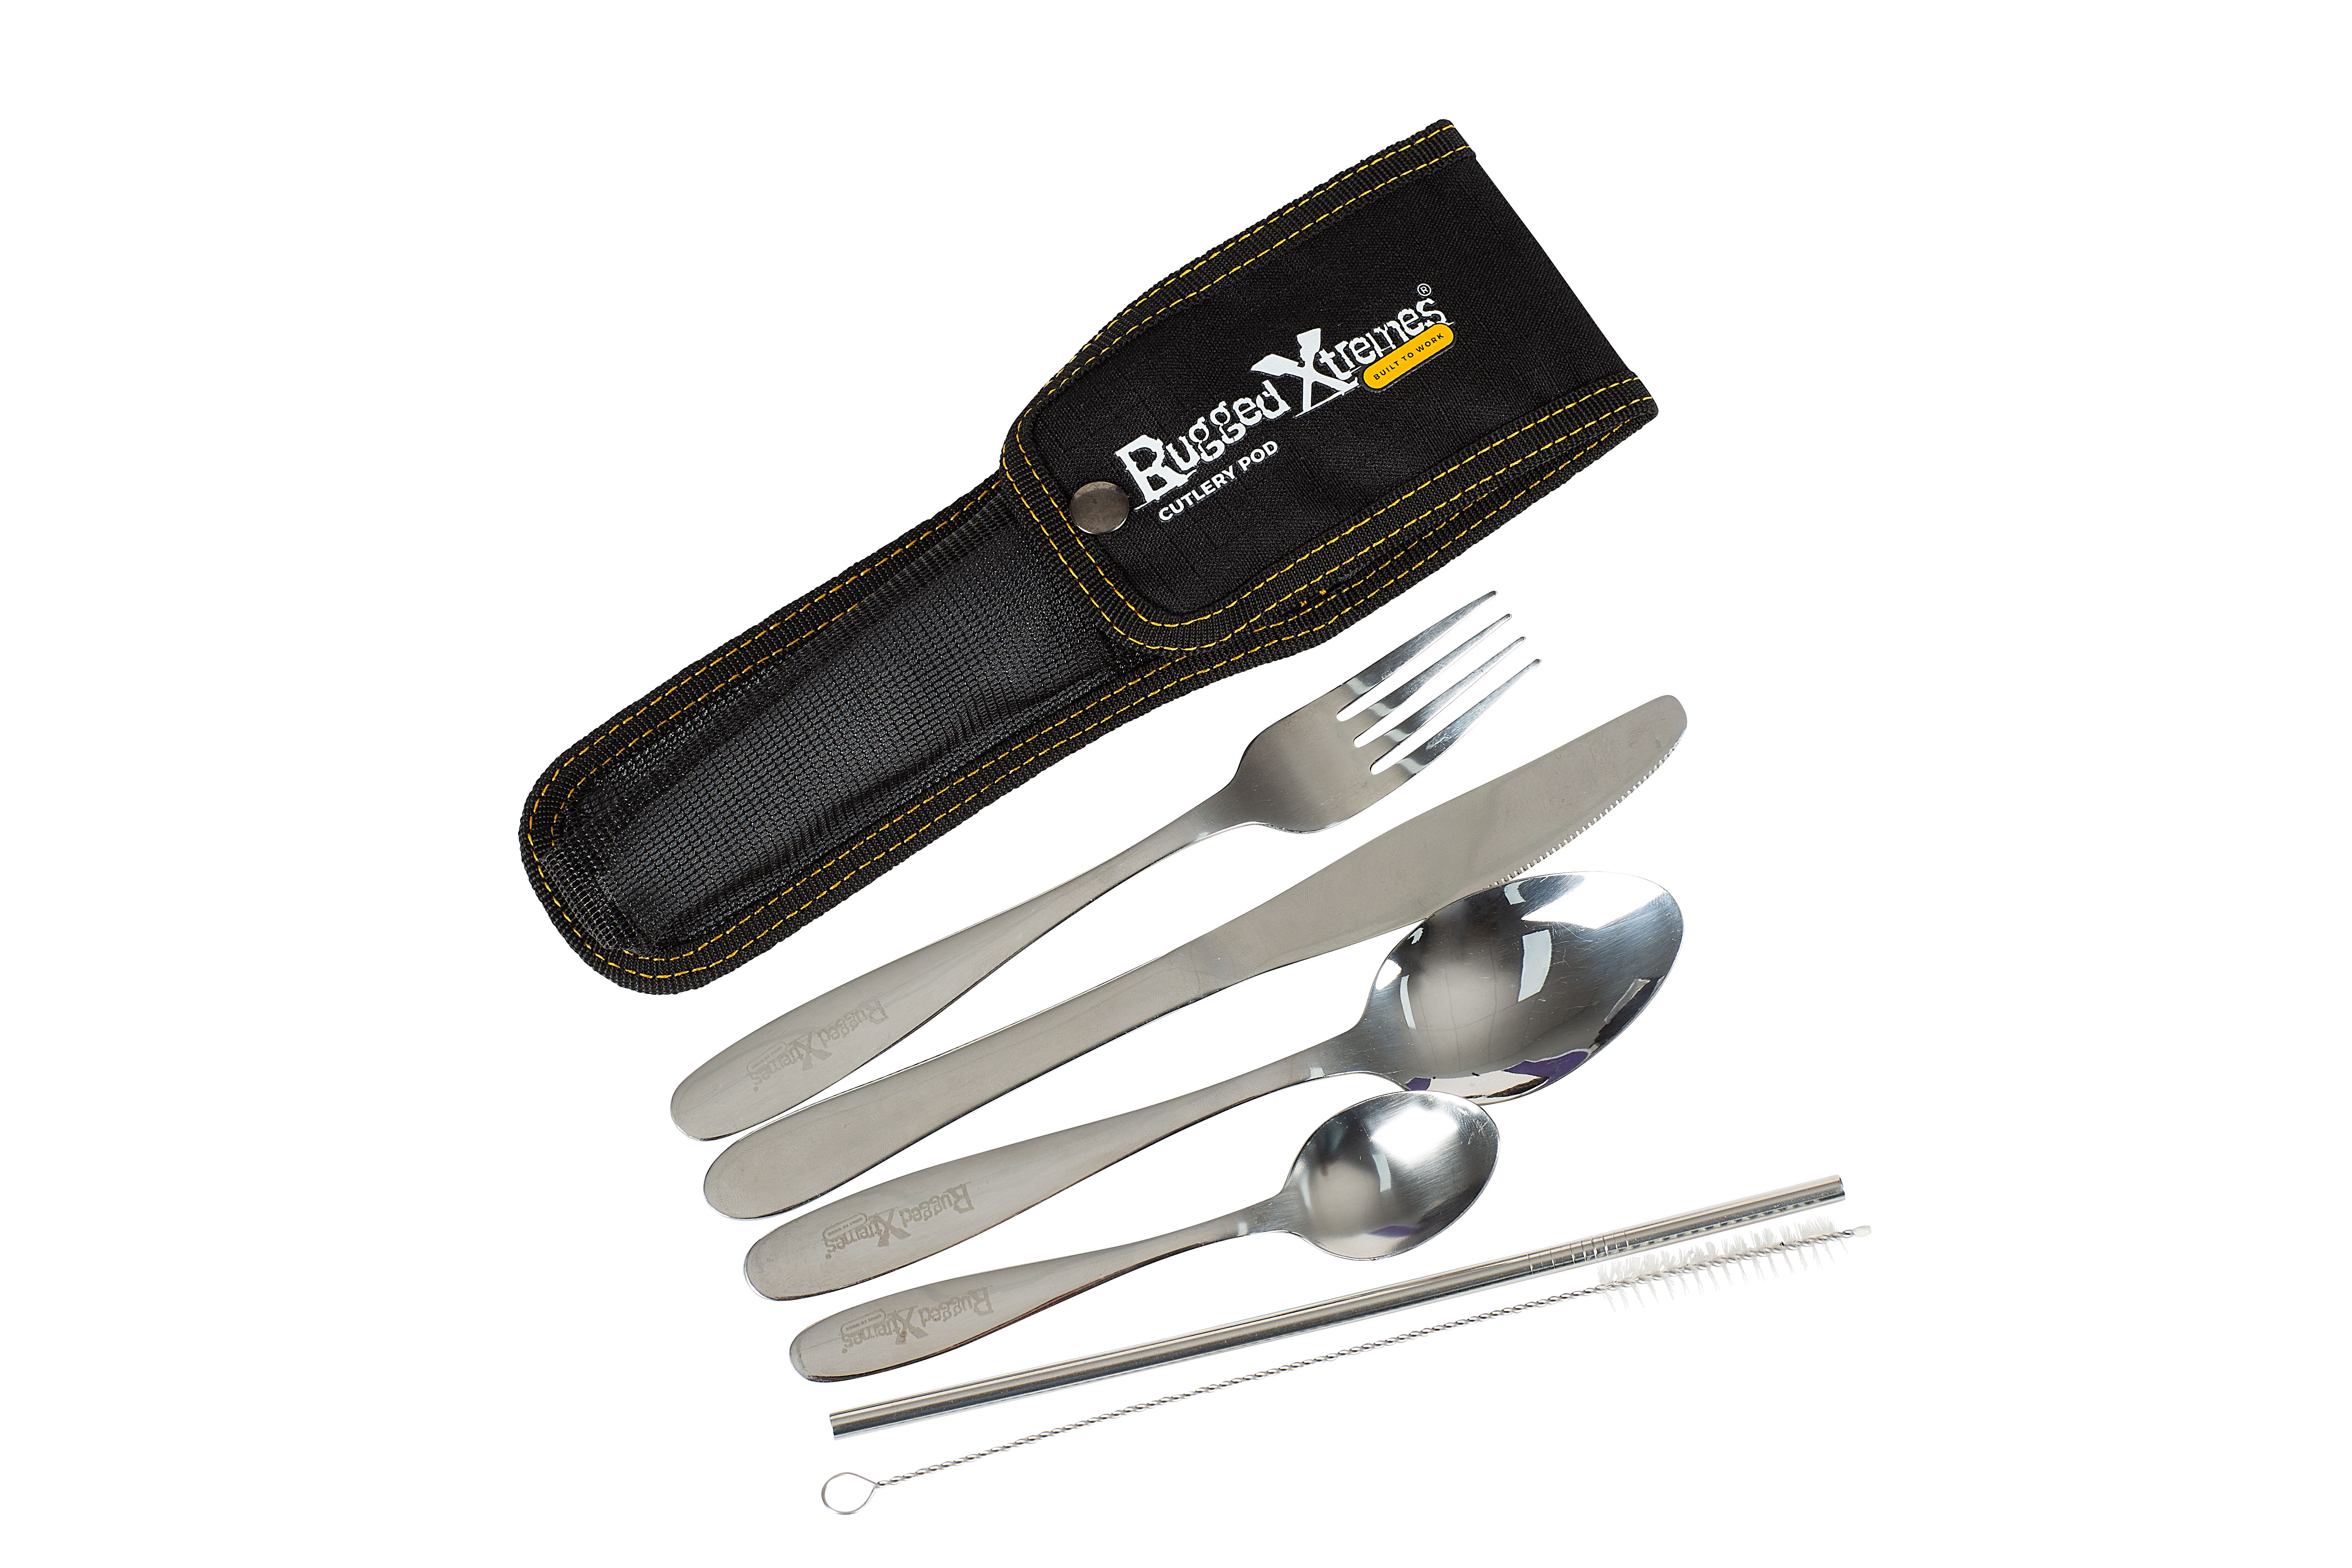 POD CONNECT S/STEEL CUTTLERY SET 7 PIECE